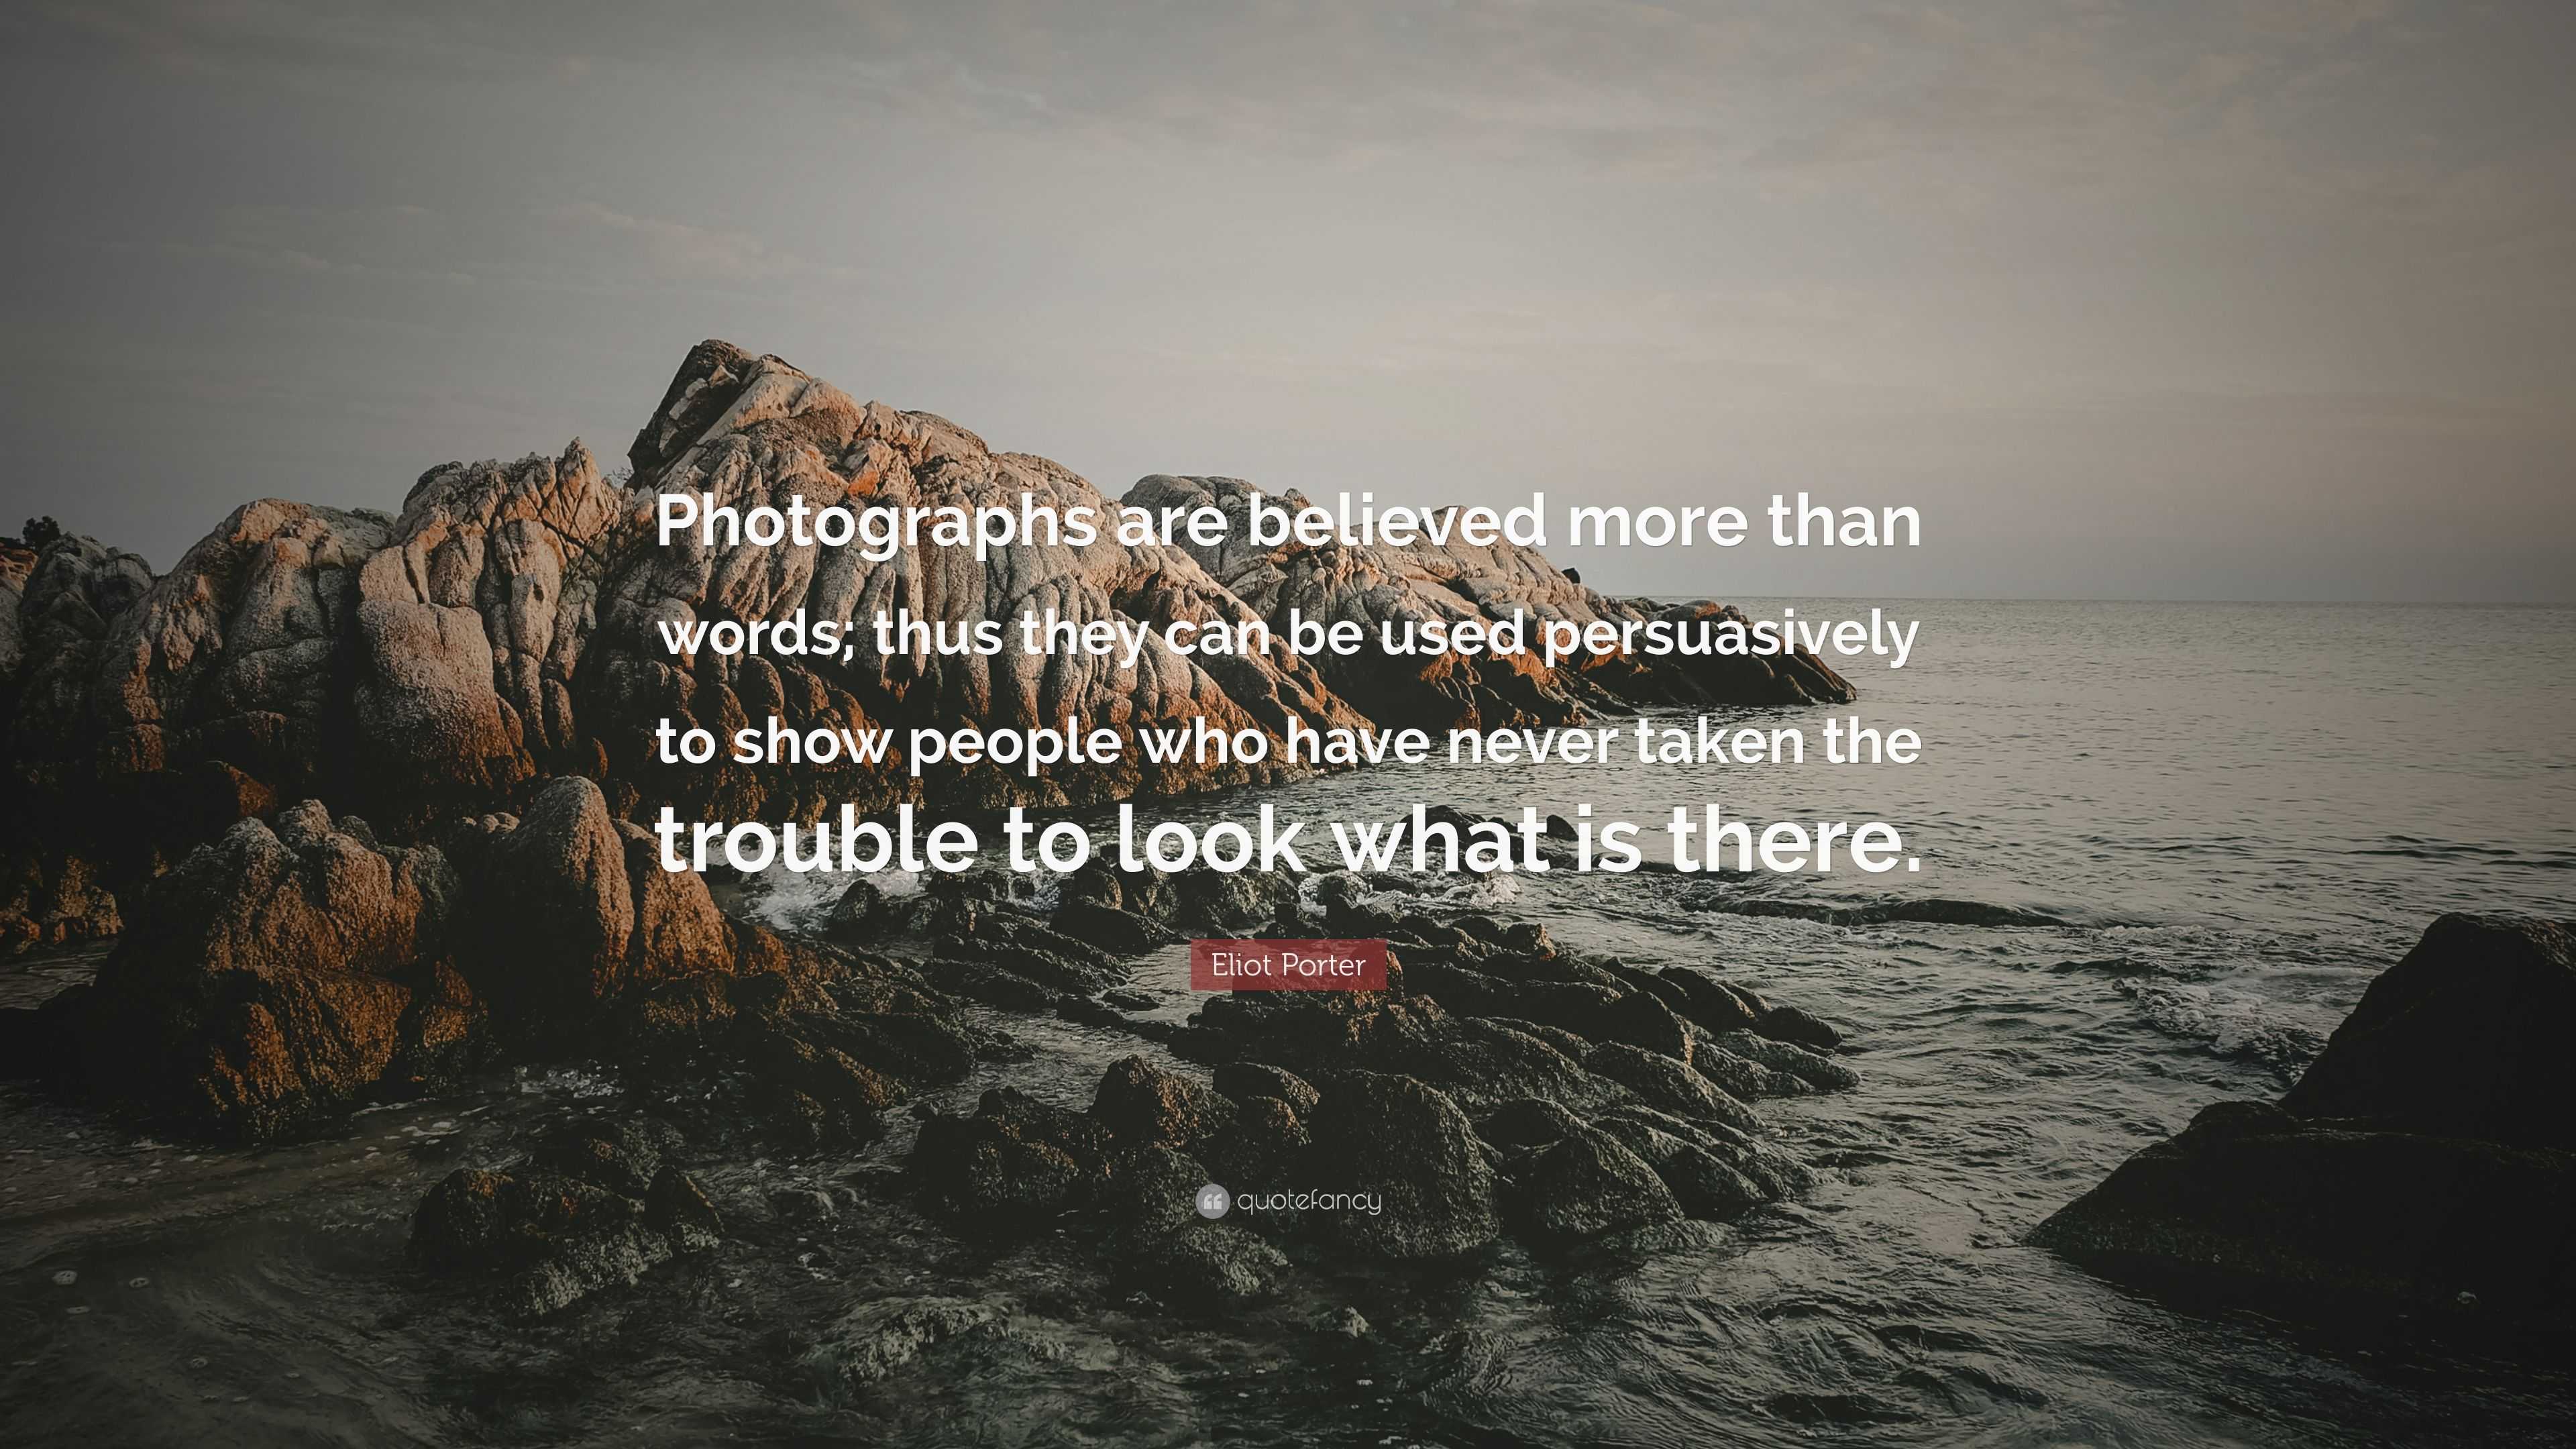 Eliot Porter Quote: “Photographs are believed more than words; thus ...